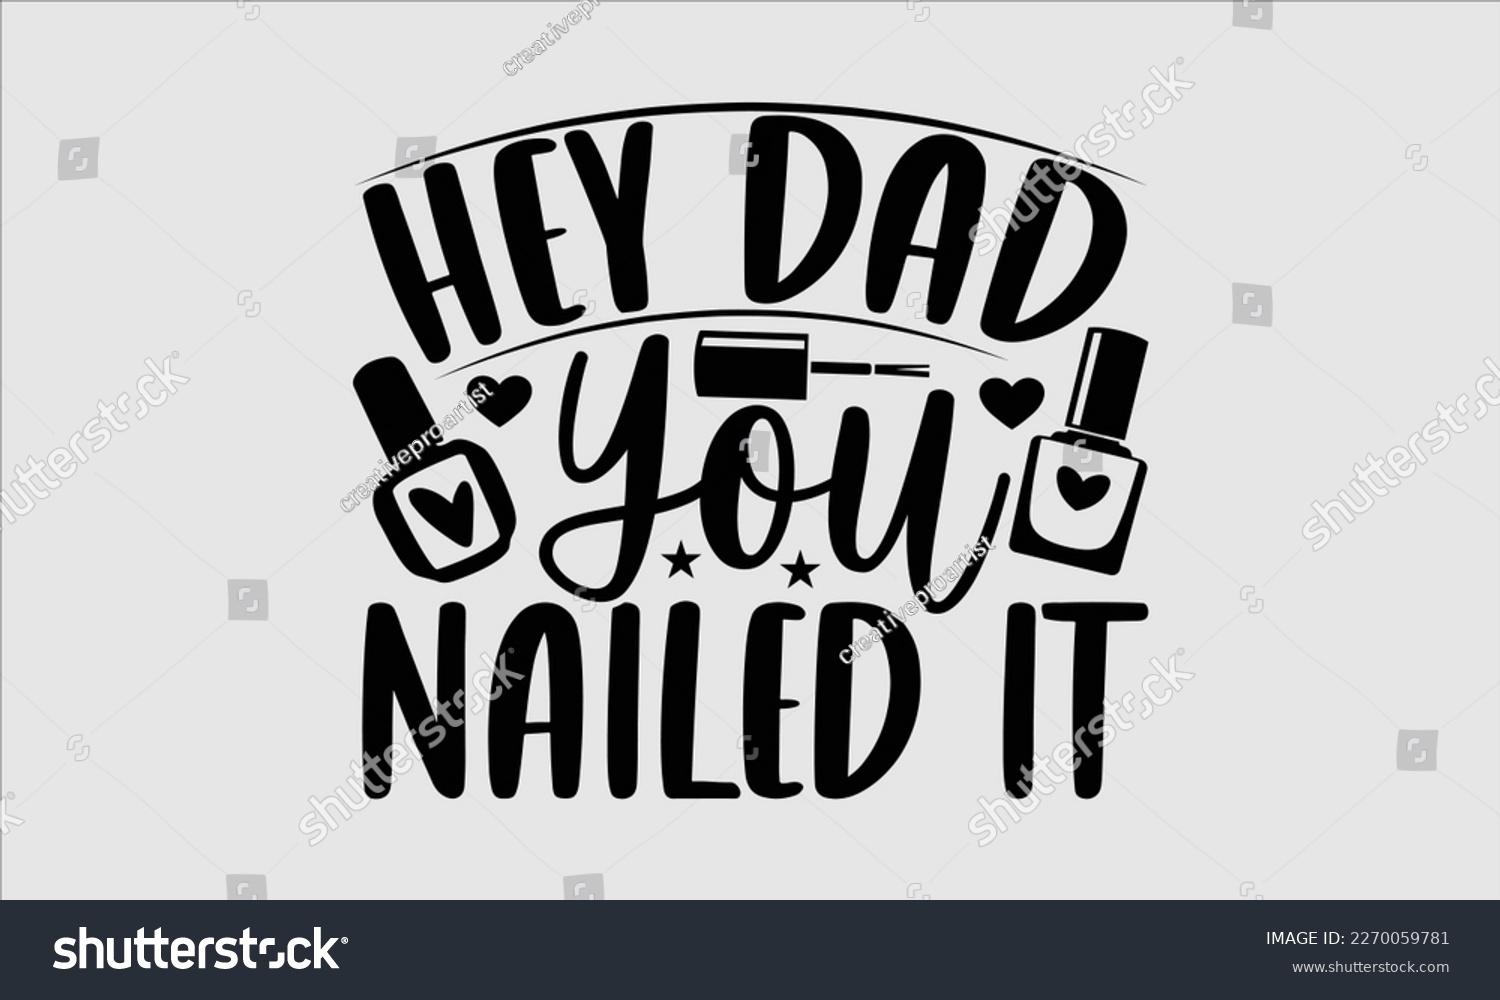 SVG of Hey dad you nailed it- Nail Tech t shirts design, Hand written lettering phrase, Isolated on white background,  Calligraphy graphic for Cutting Machine, svg eps 10. svg